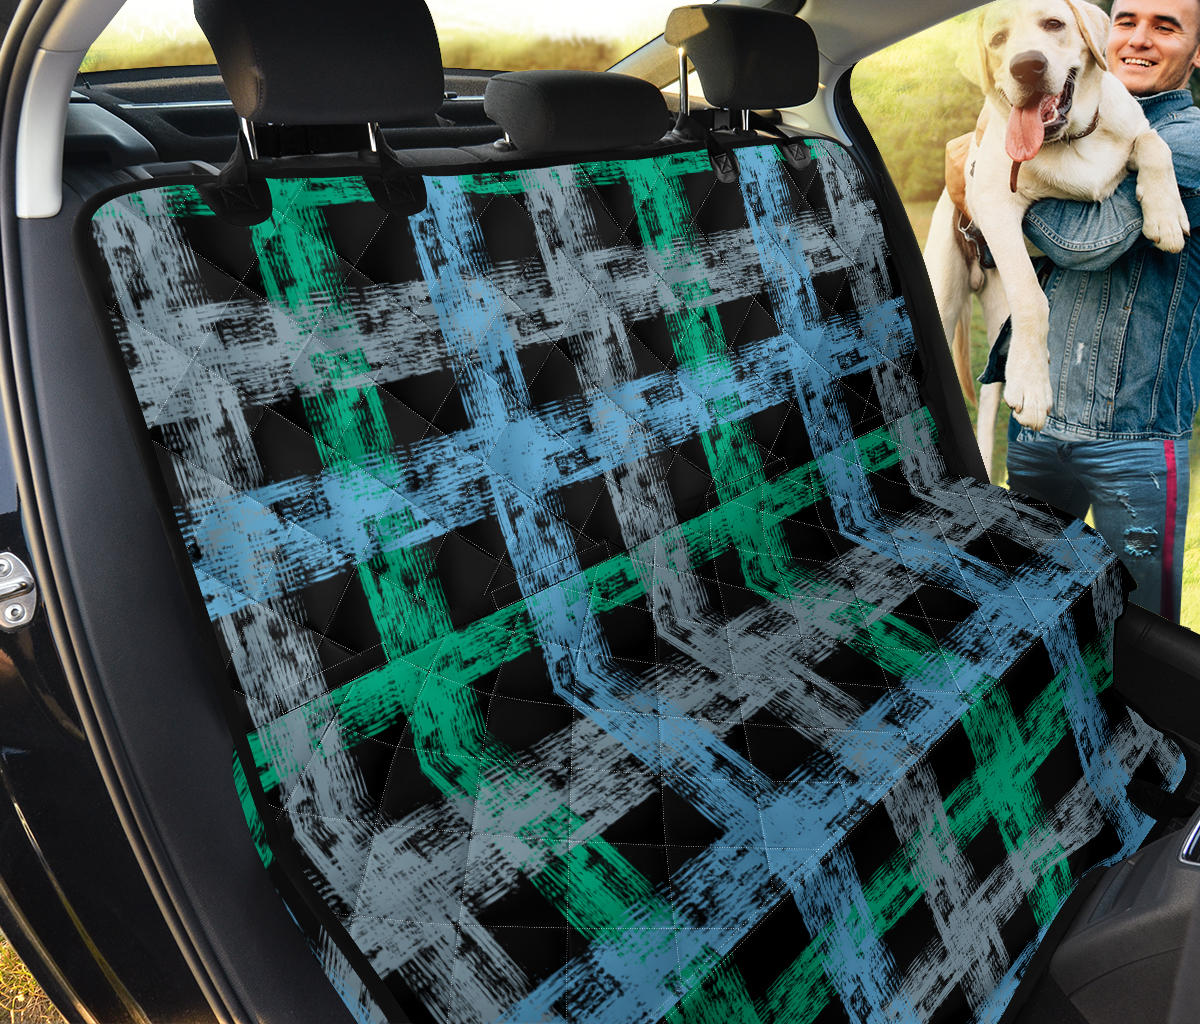 Abstract Plaid Car Back Seat Pet Cover